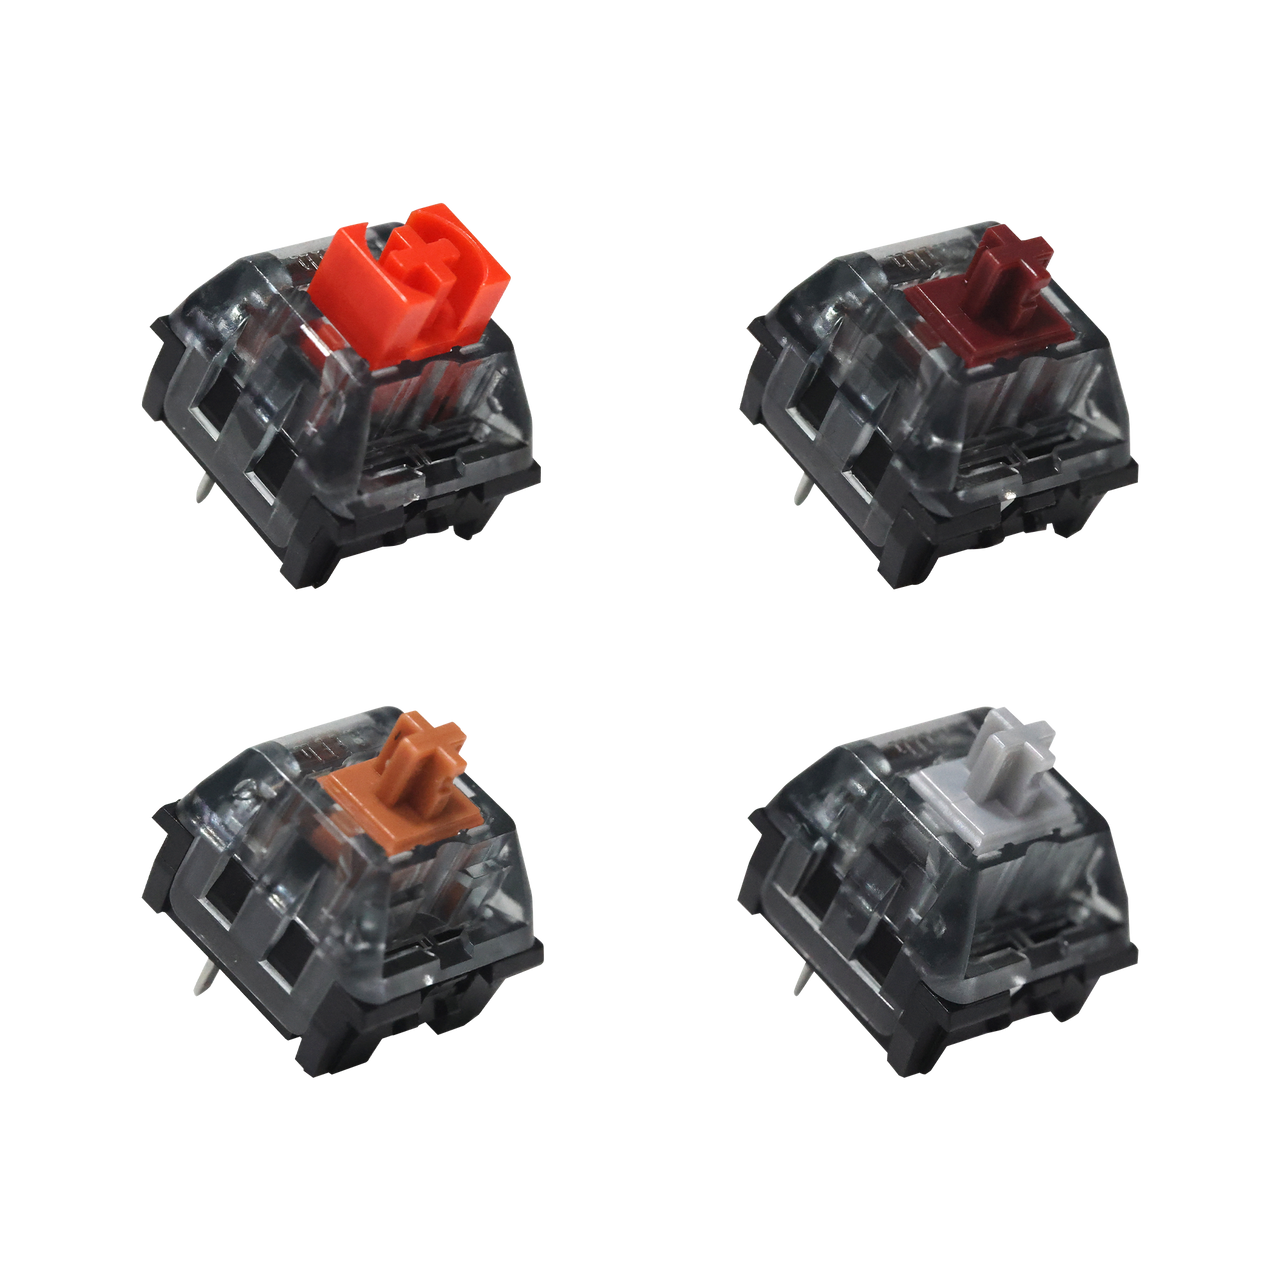 Kailh V2 Super Speed Switches-Chosfox